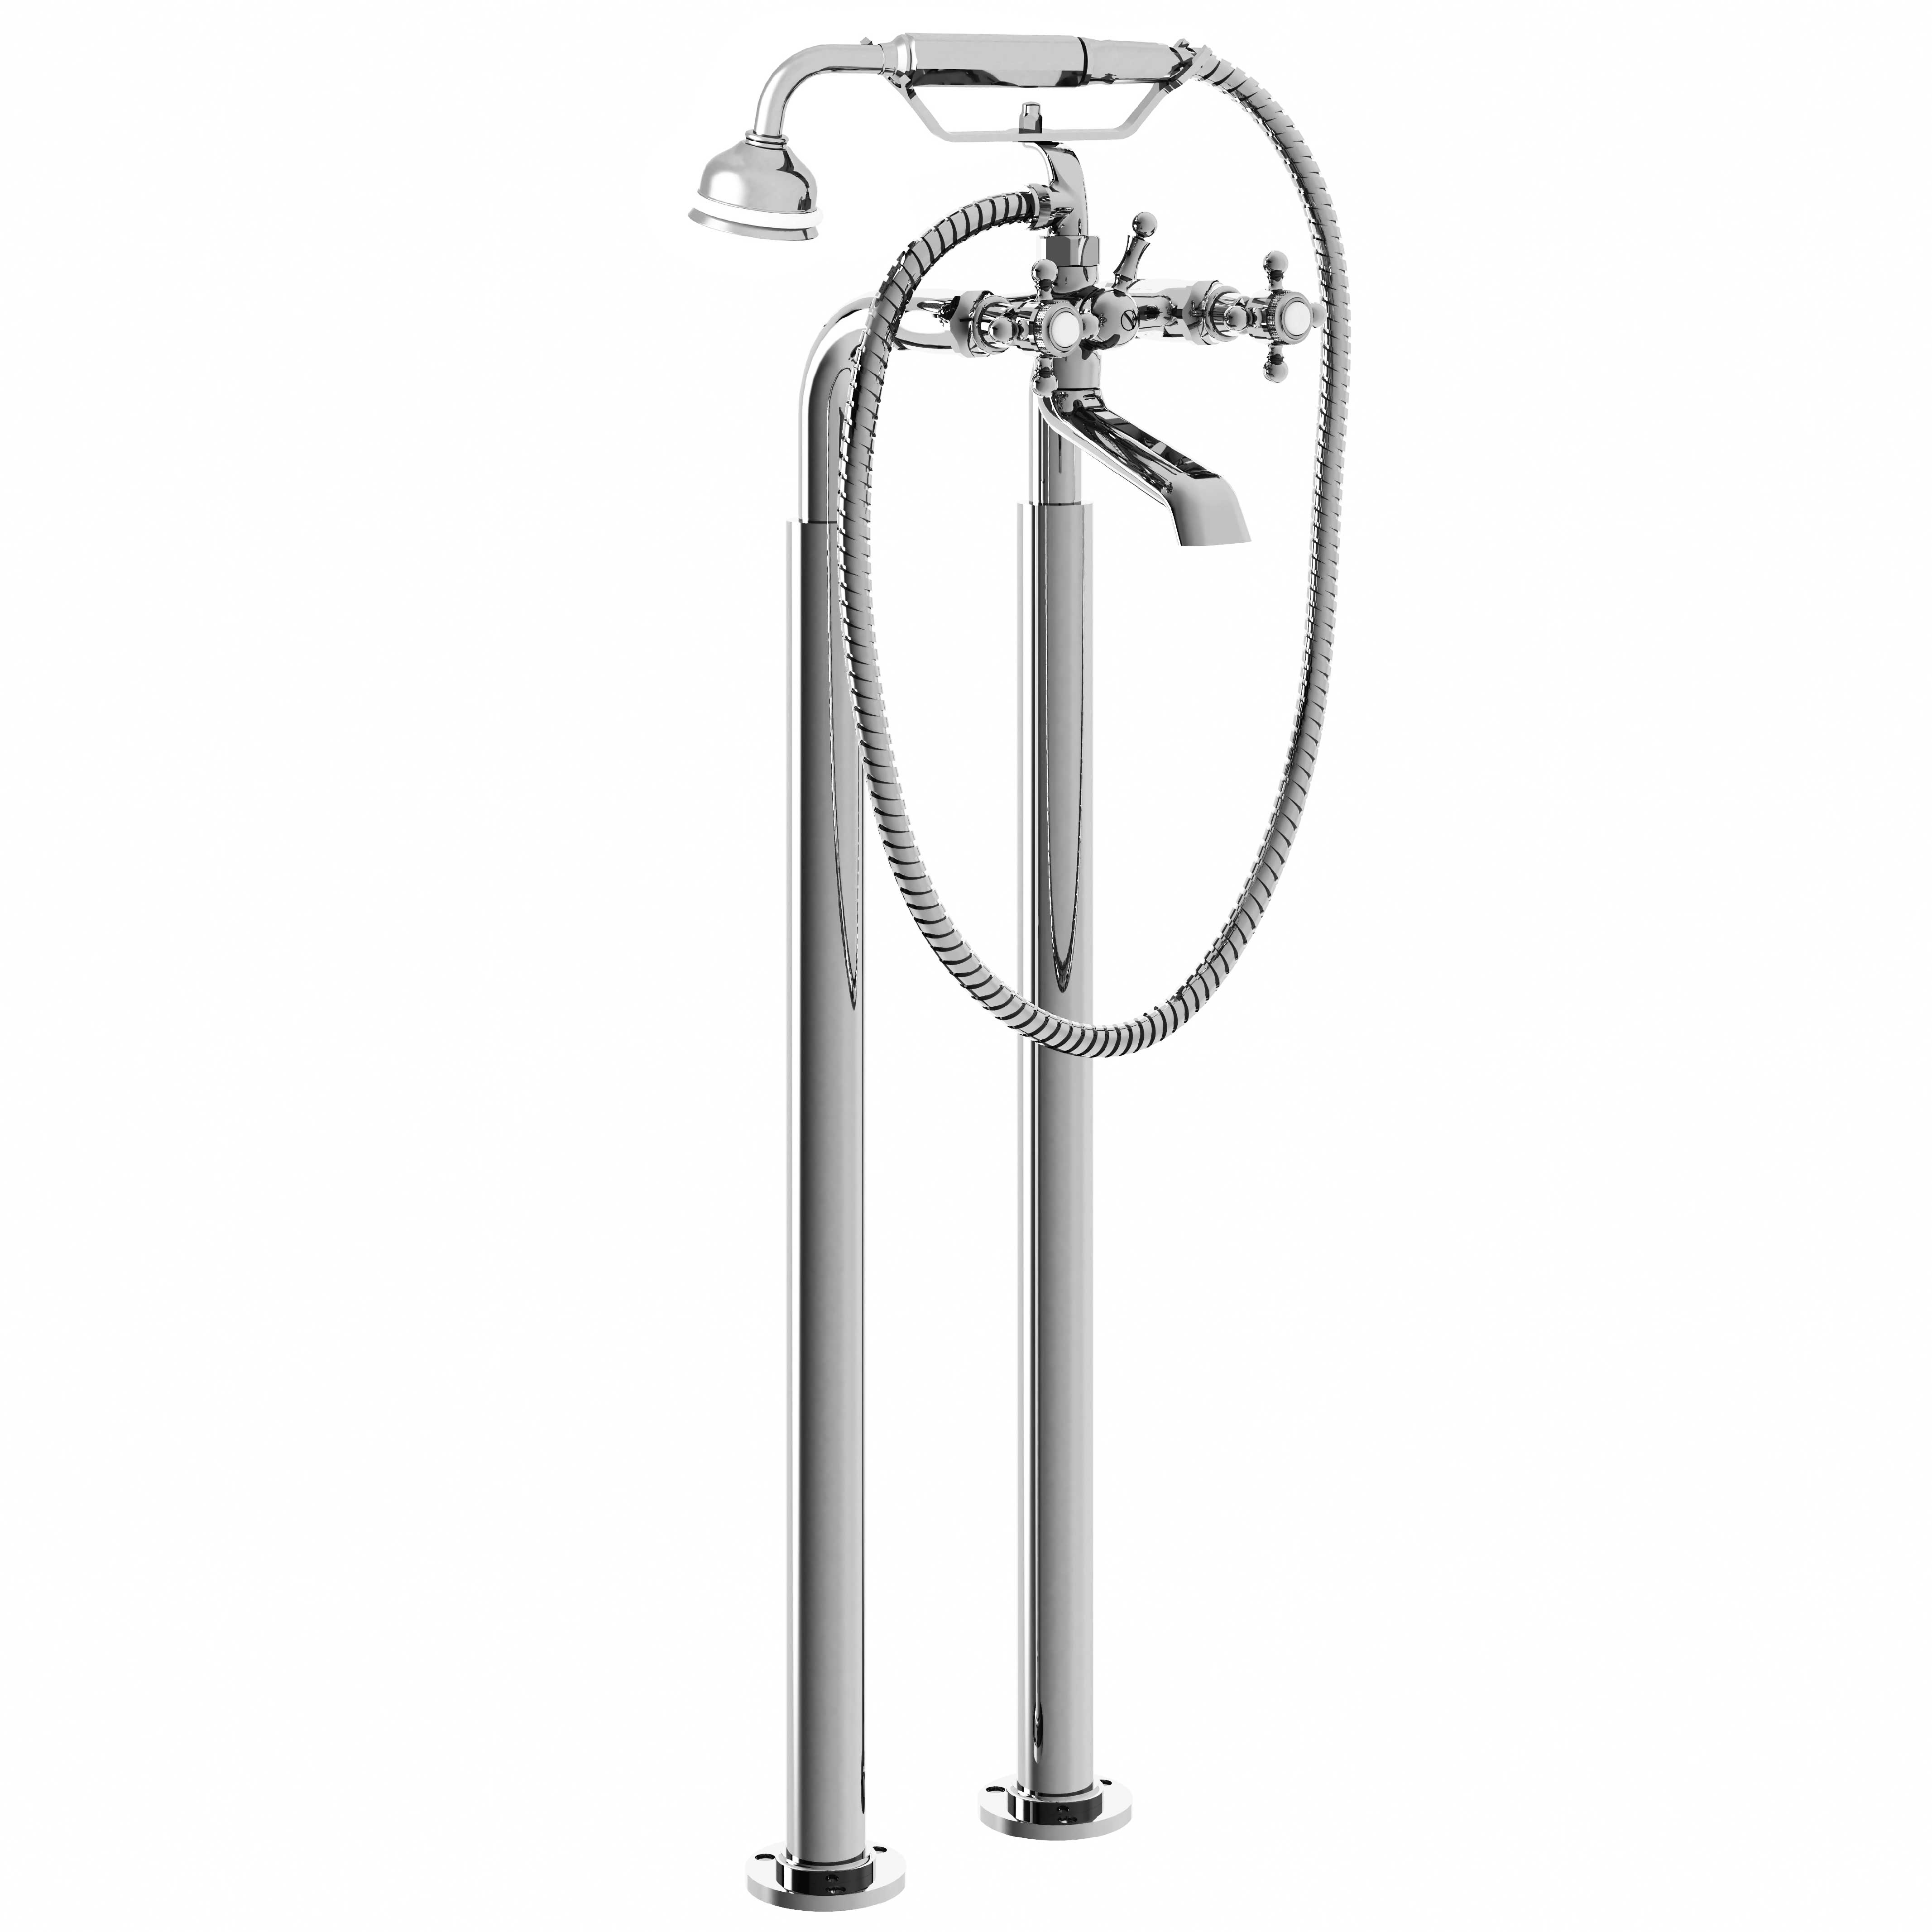 M30-3309 Floor mounted bath and shower mixer